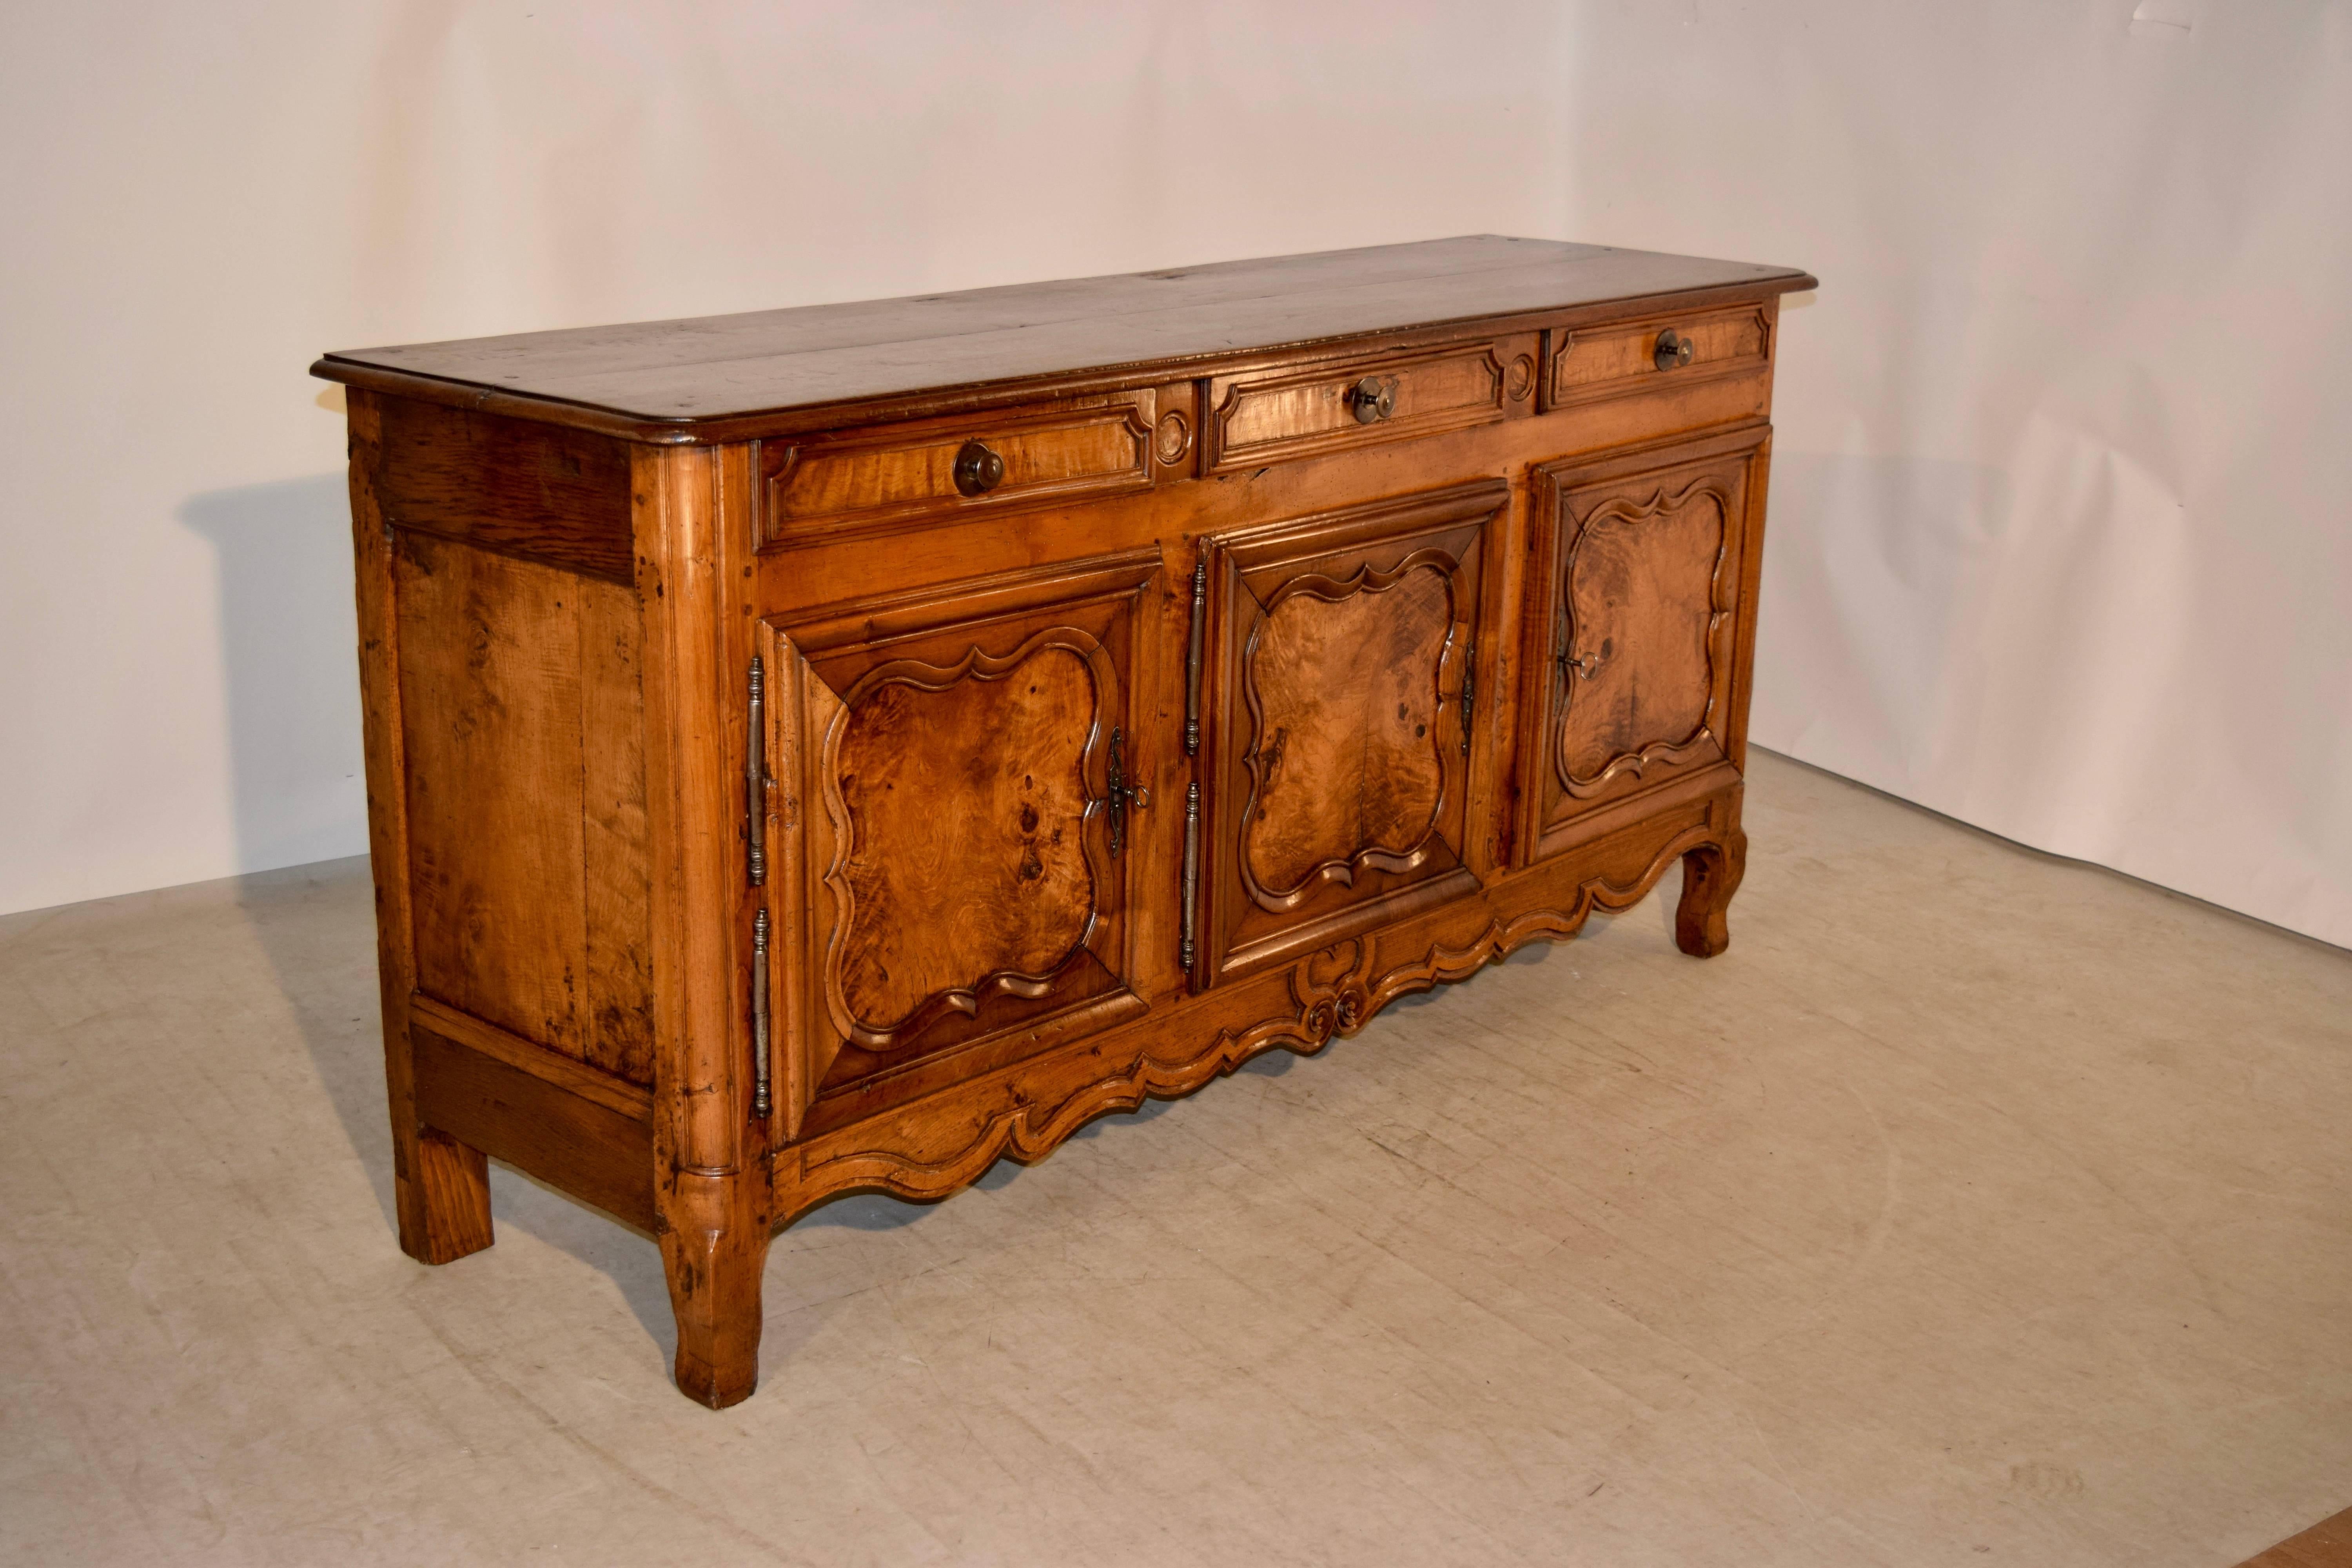 19th century enfilade from France made from walnut. The top has a beveled edge and is beveled around the edge, following down to three drawers with hand paneled drawer fronts over three hand paneled doors with raised paneled fronts and central